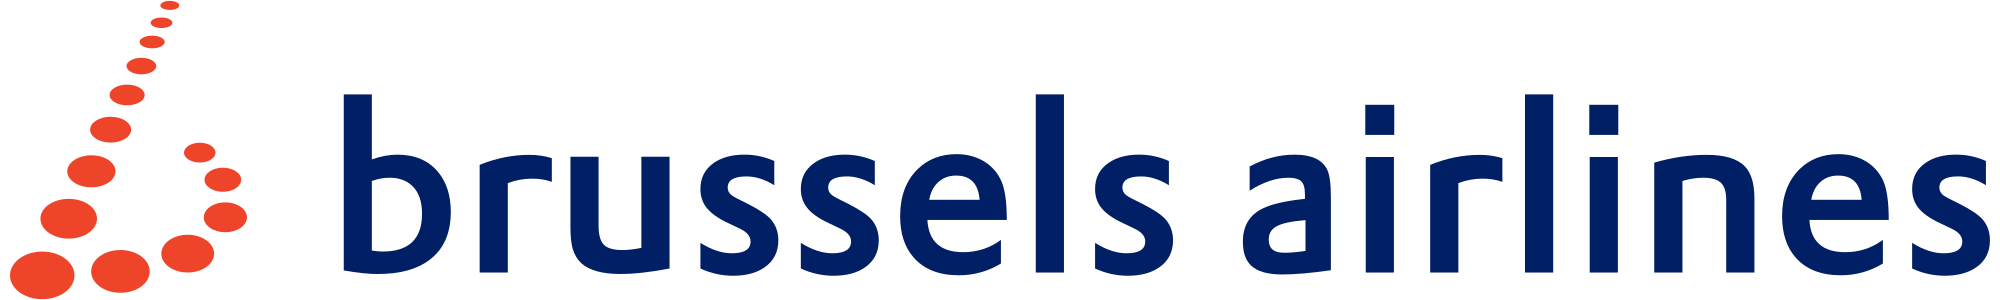 Brussels Airlines Logo - File:Brussels Airlines logo.svg - Wikimedia Commons